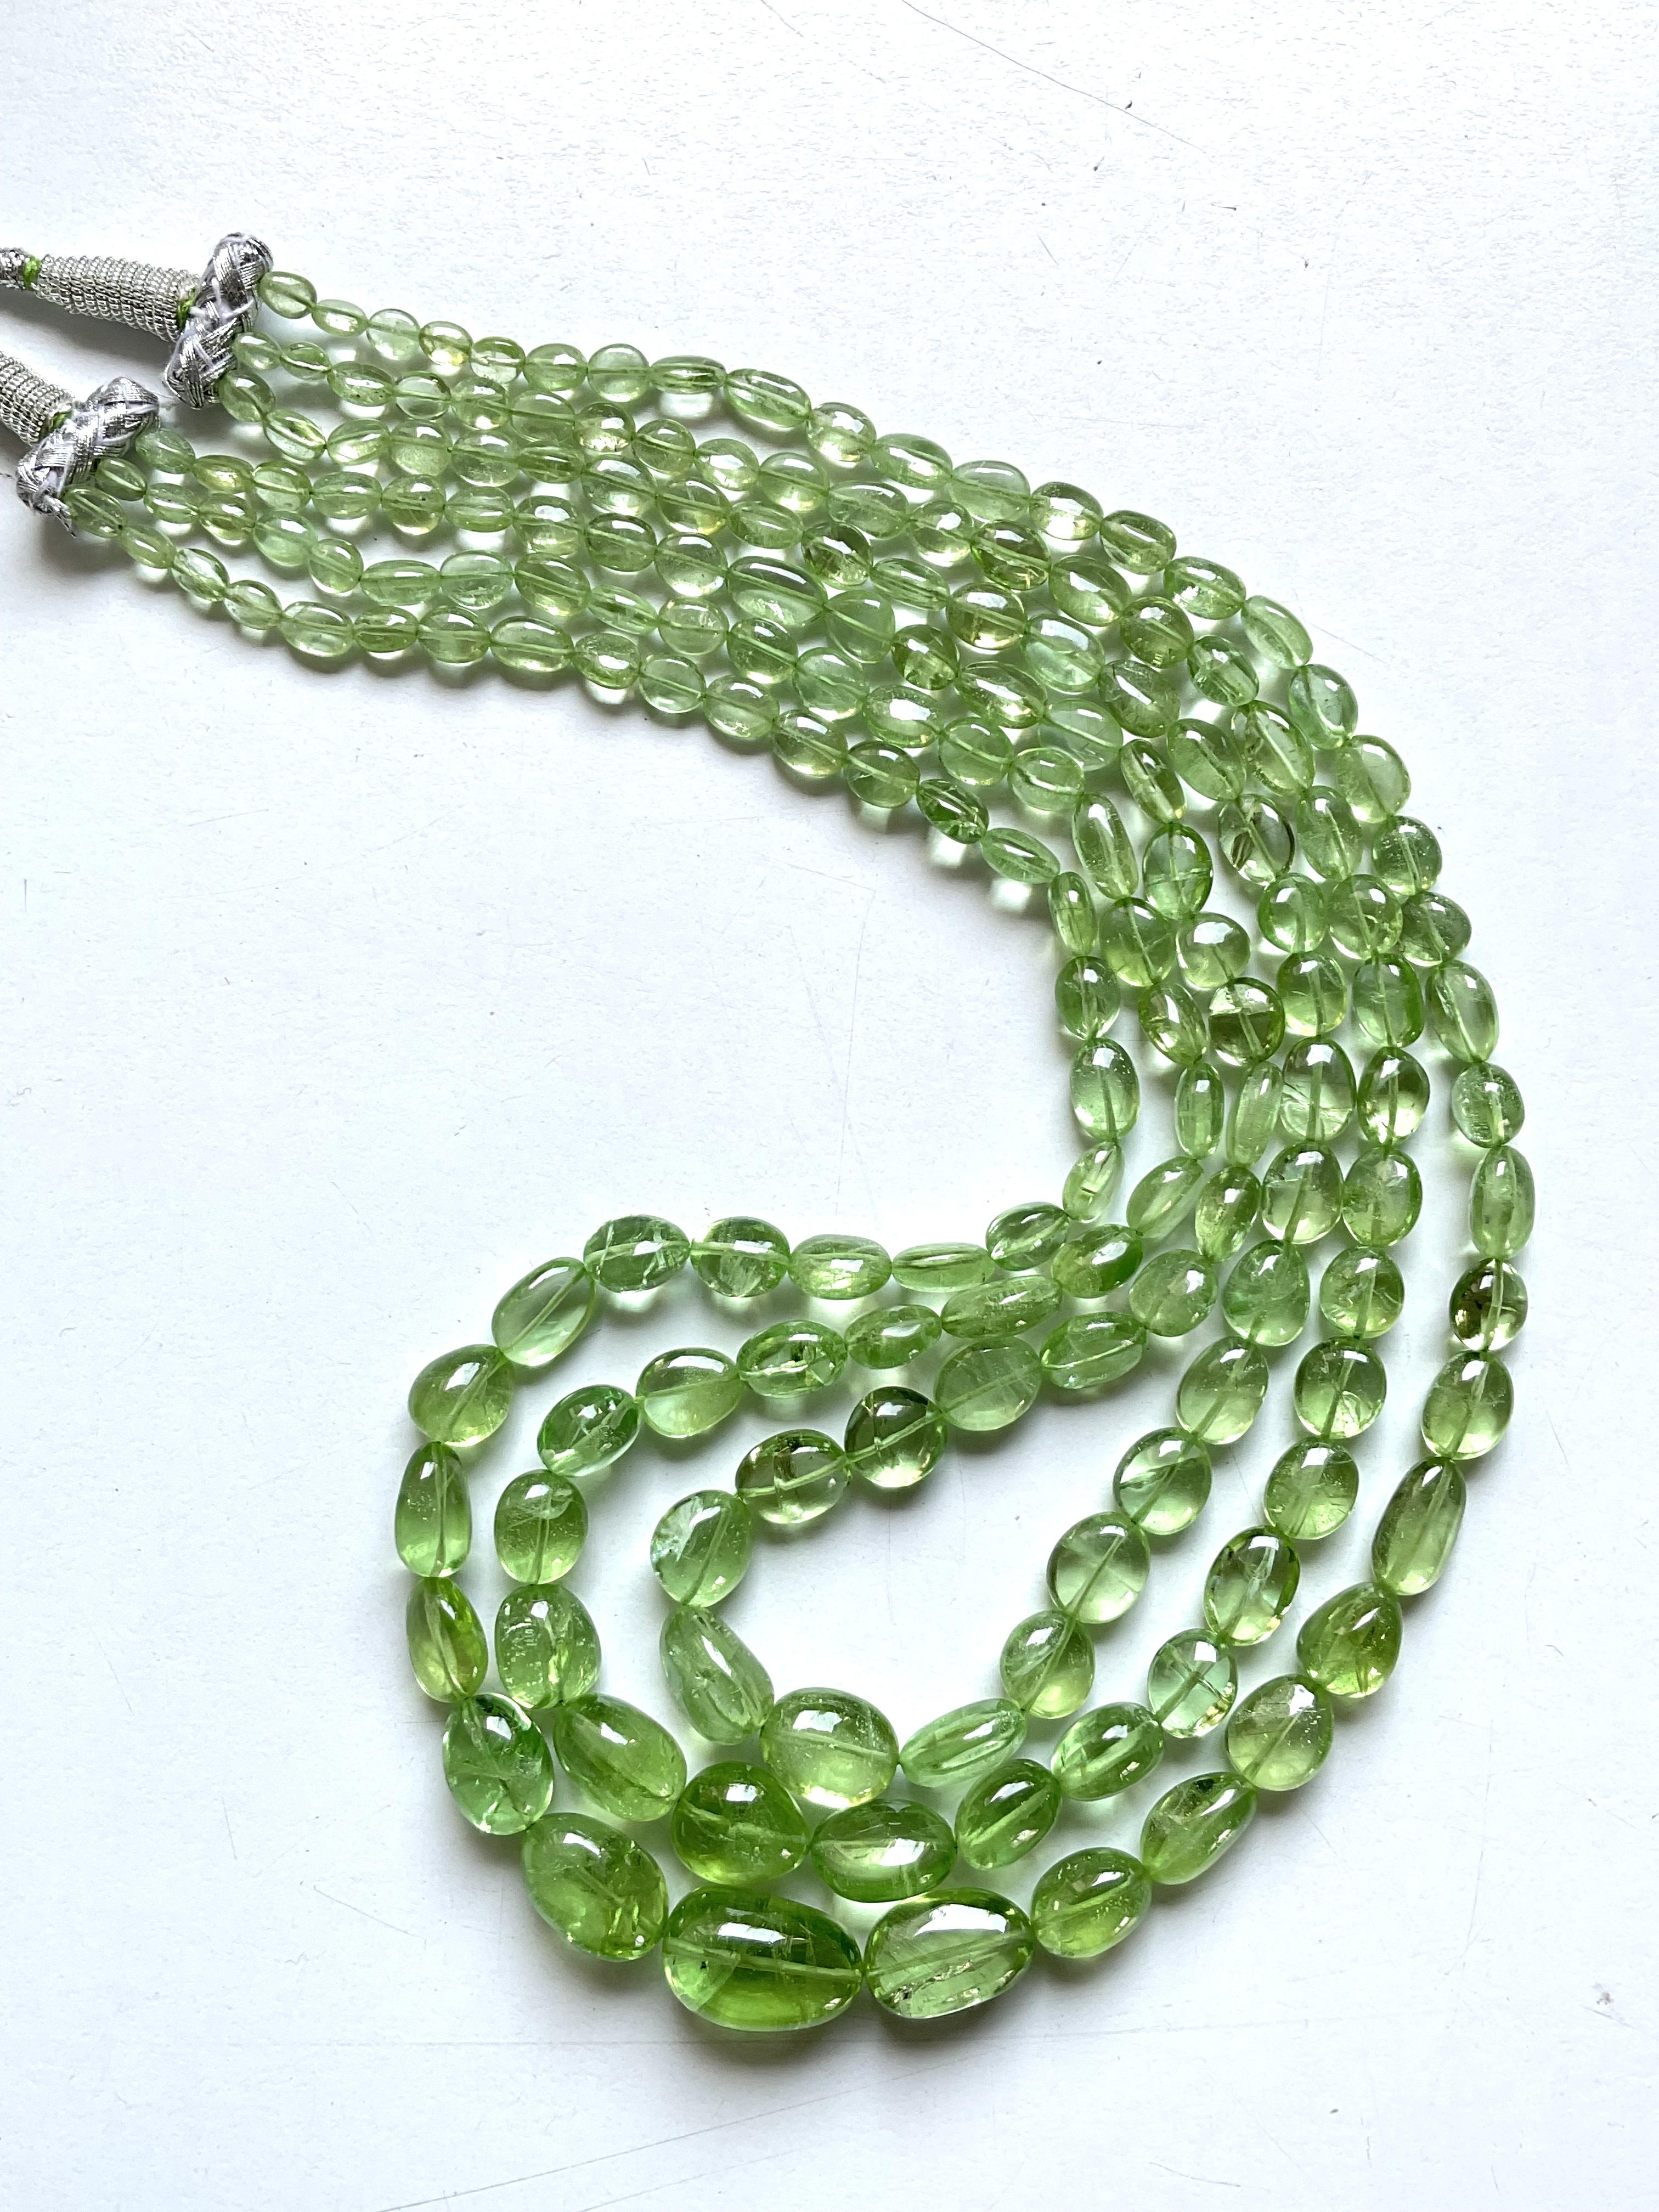 Women's or Men's 507.40 carats apple green peridot top quality plain tumbled natural necklace gem For Sale